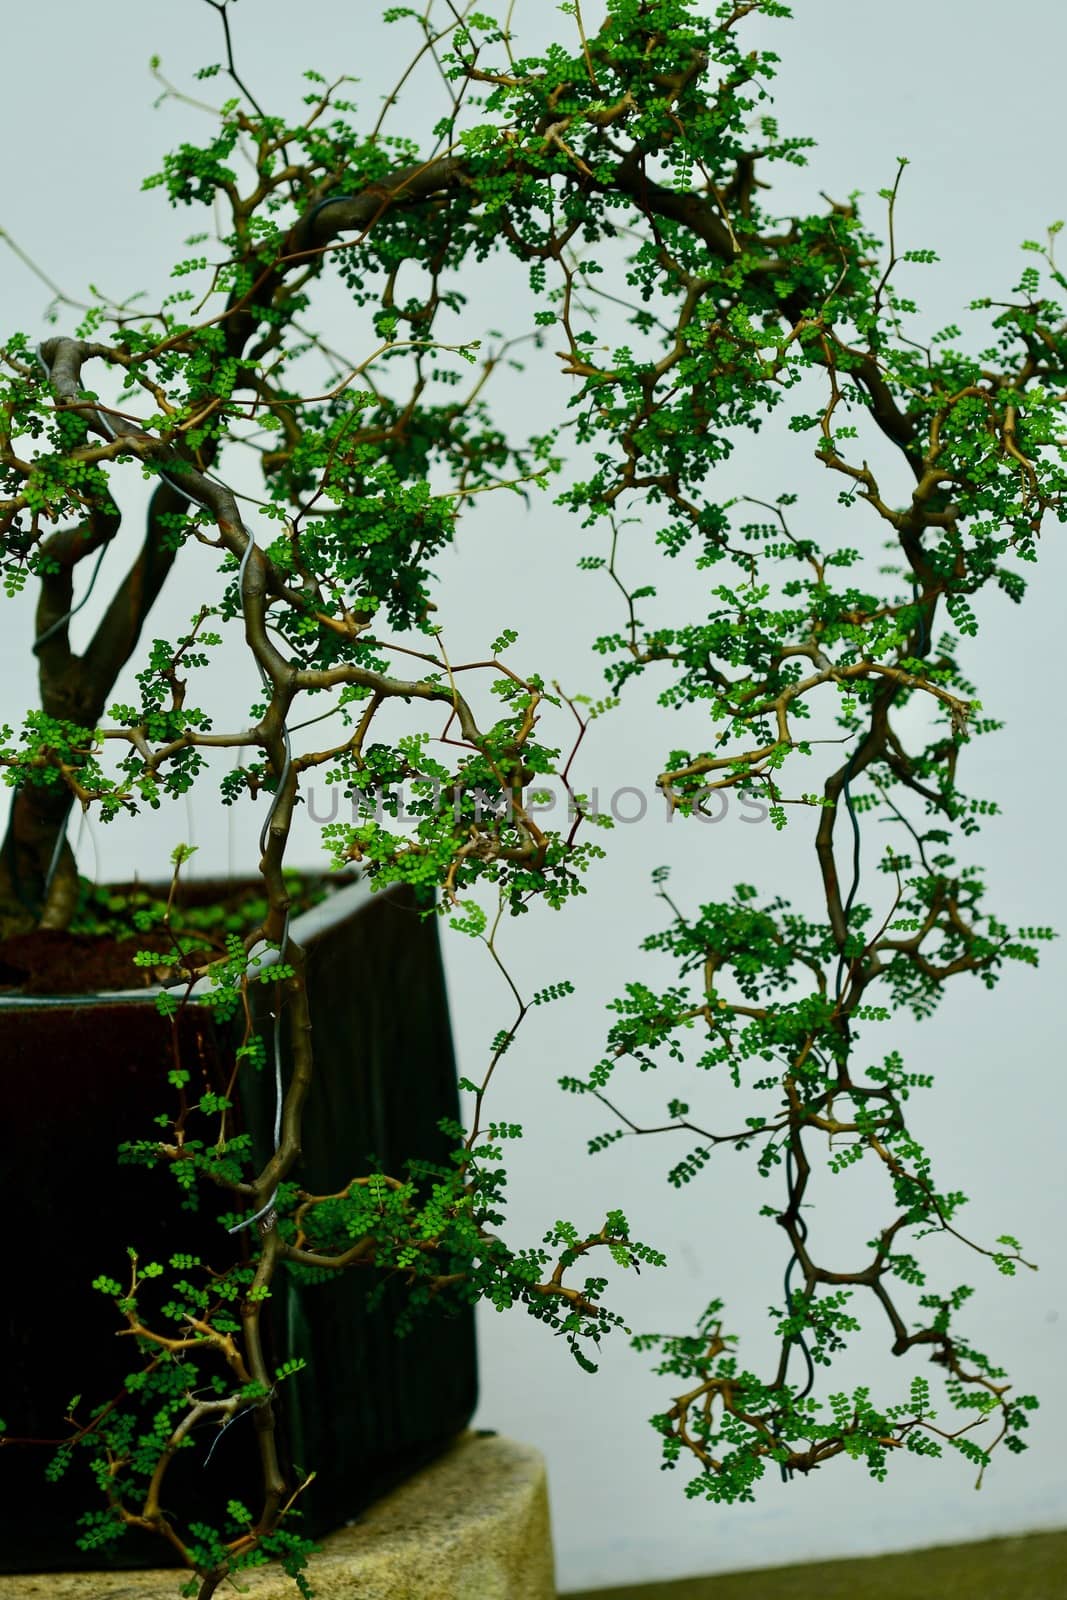 Bonsai tree. This is a Japanese art form using cultivation techniques to produce, in containers, small trees that mimic the shape and scale of full size trees.  by Marshalkina